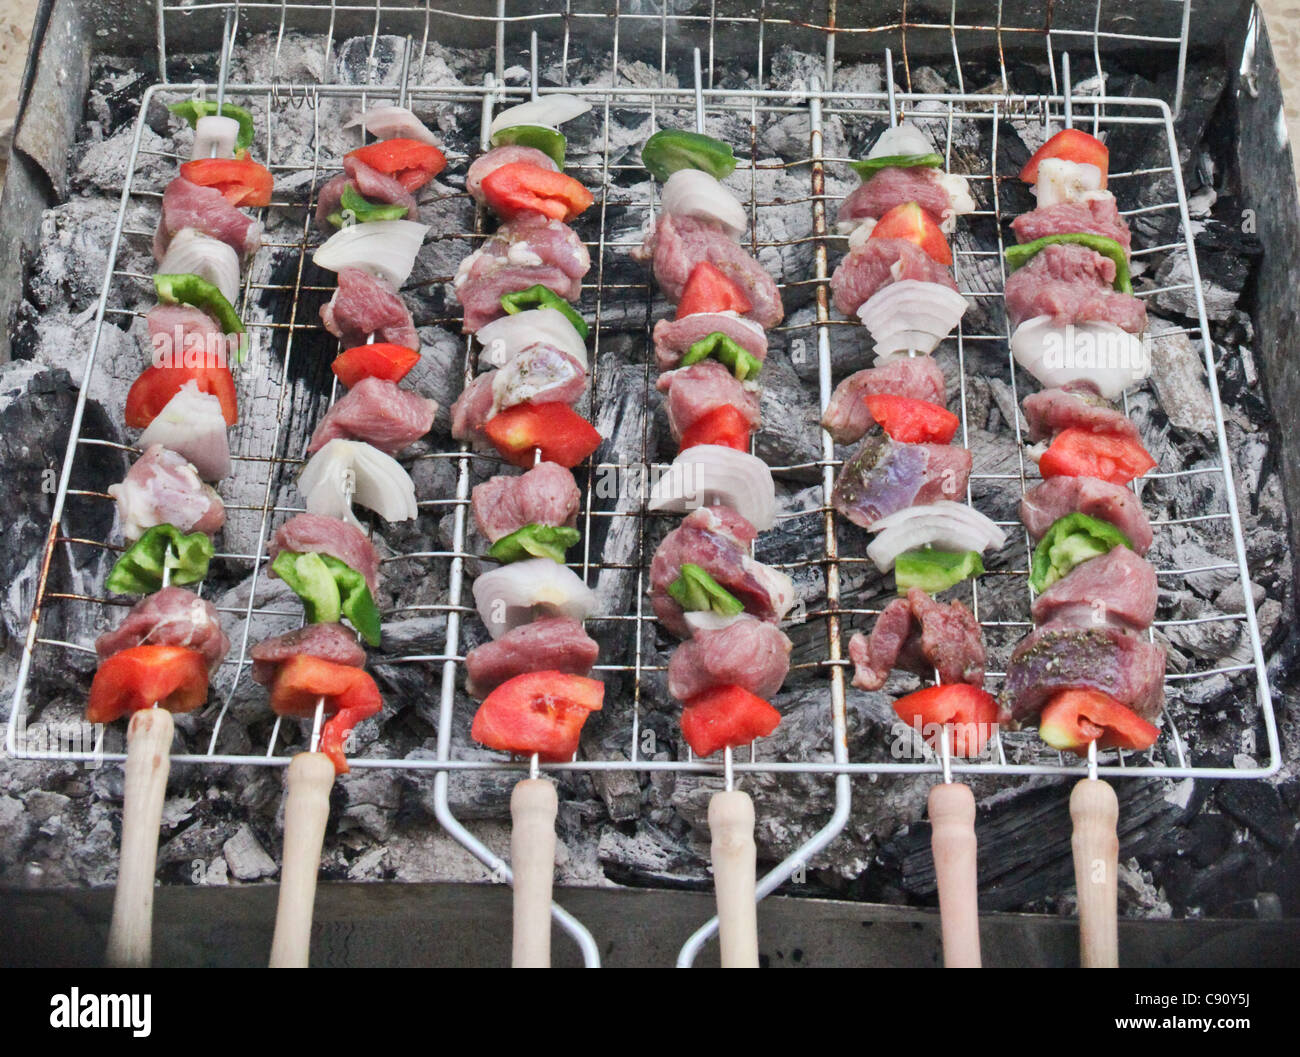 MEAT AND VEGETABLES ON A BARBECUE Stock Photo